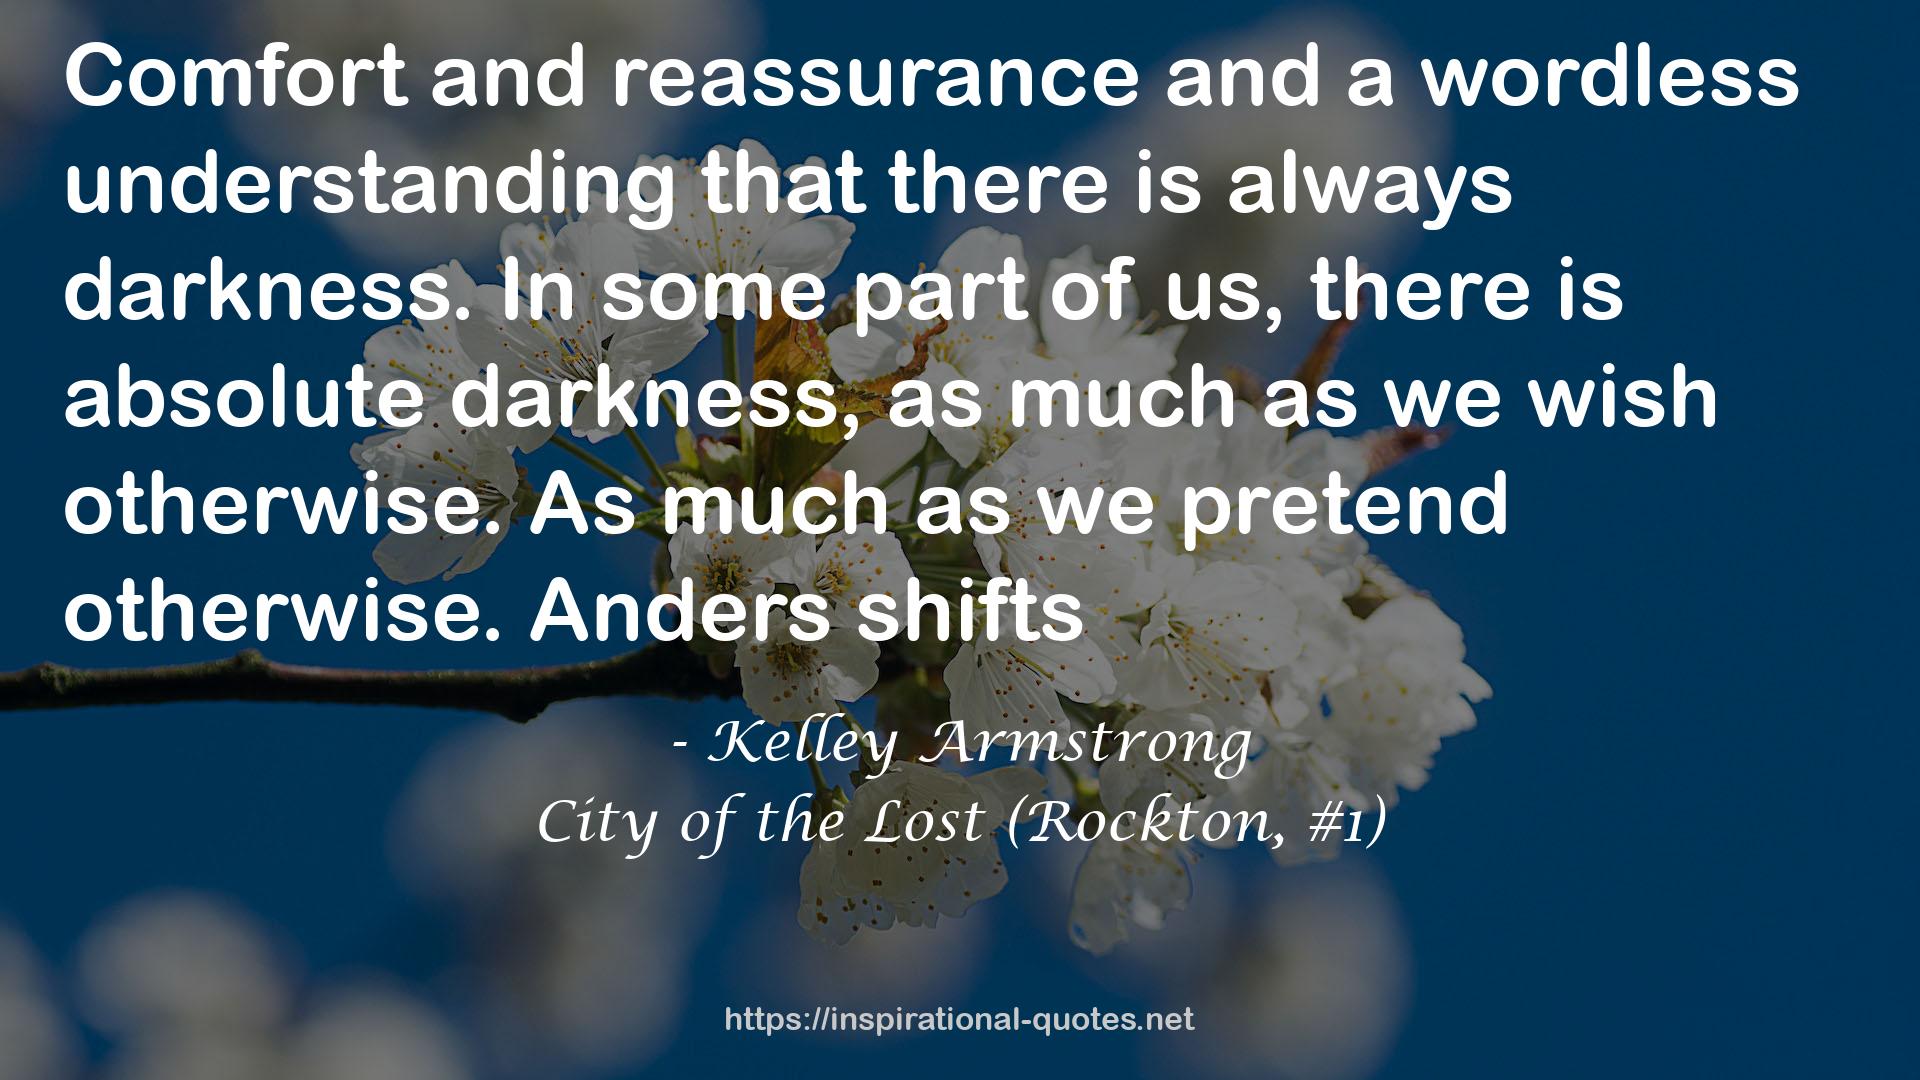 City of the Lost (Rockton, #1) QUOTES